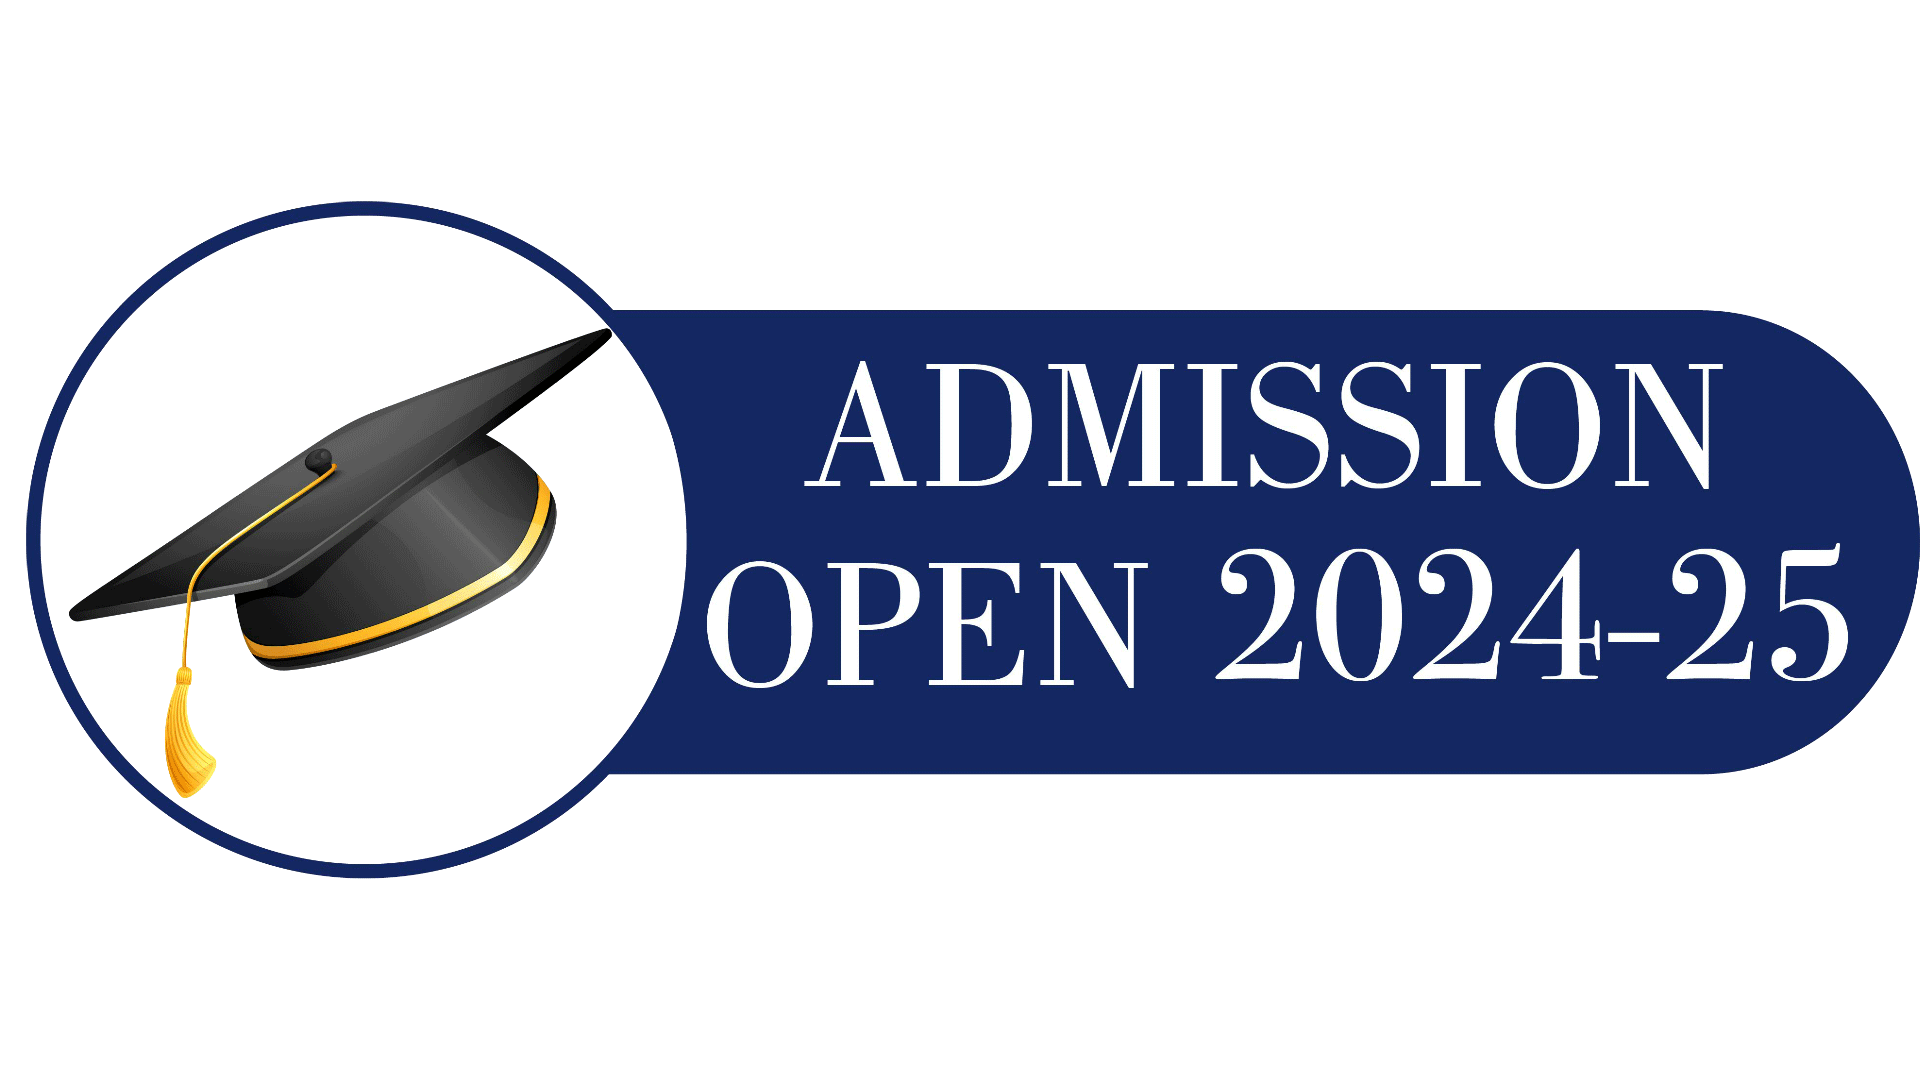 MSIT Admission open 2024-25